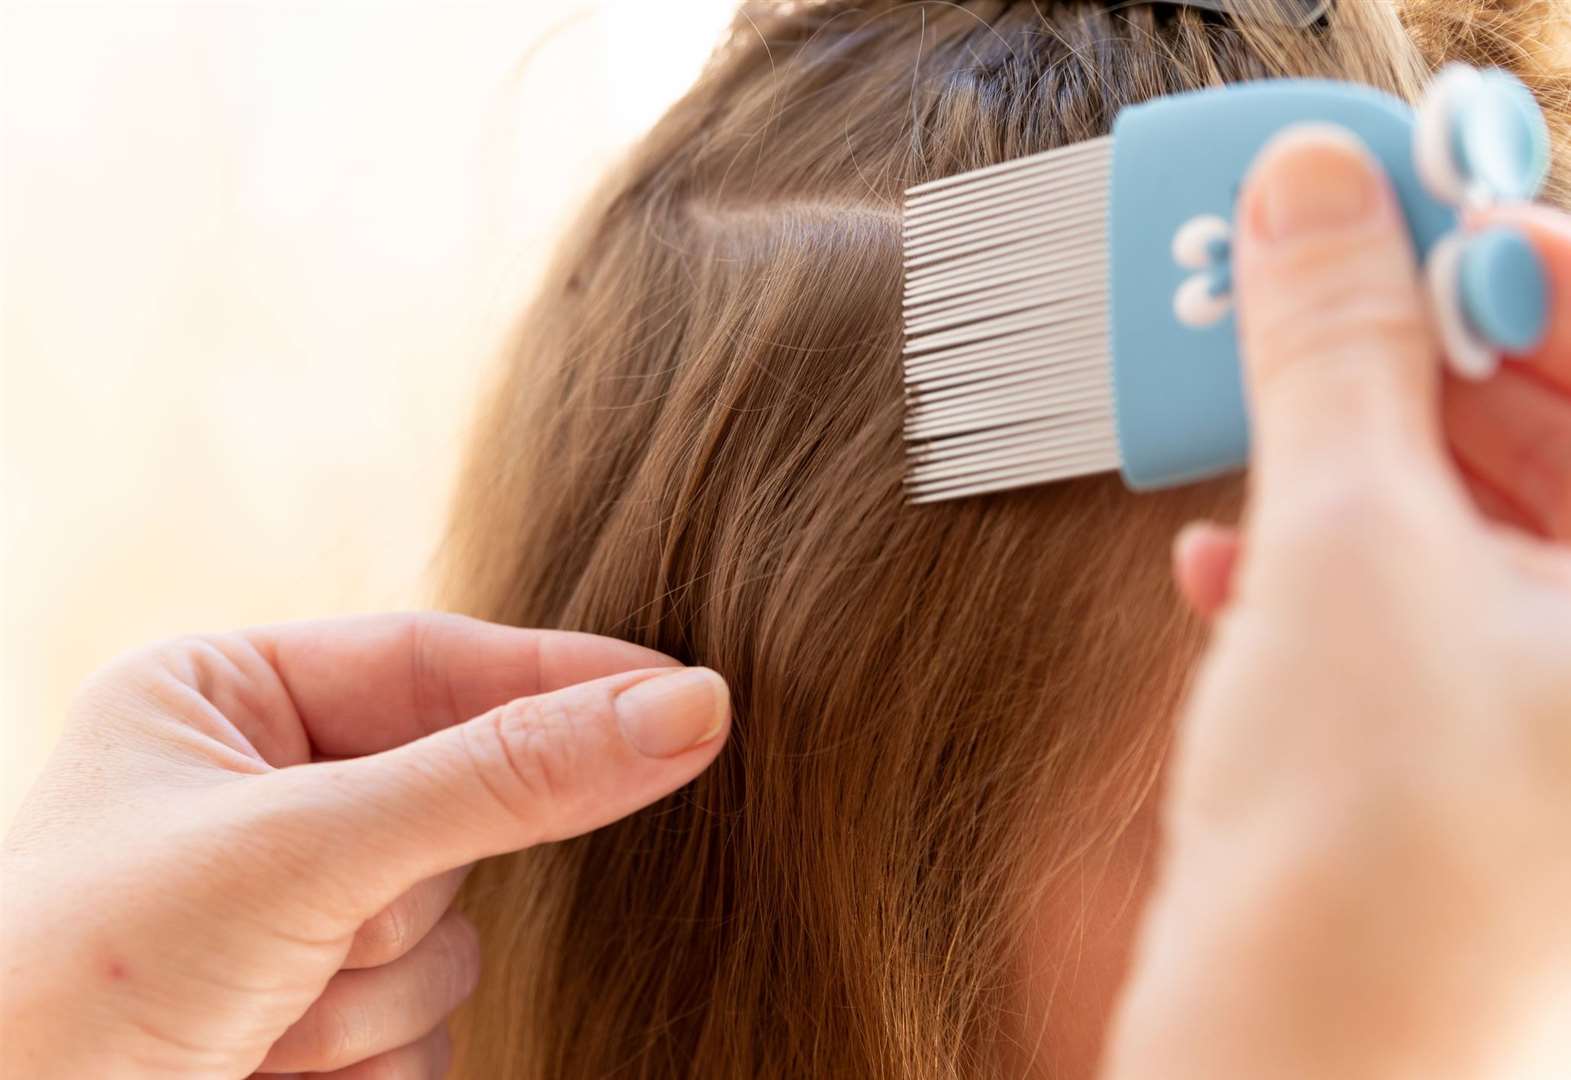 NHS England says it has noticed a rise in people needing help with head lice since the start of September. Image: iStock/Jose Luis Castro.